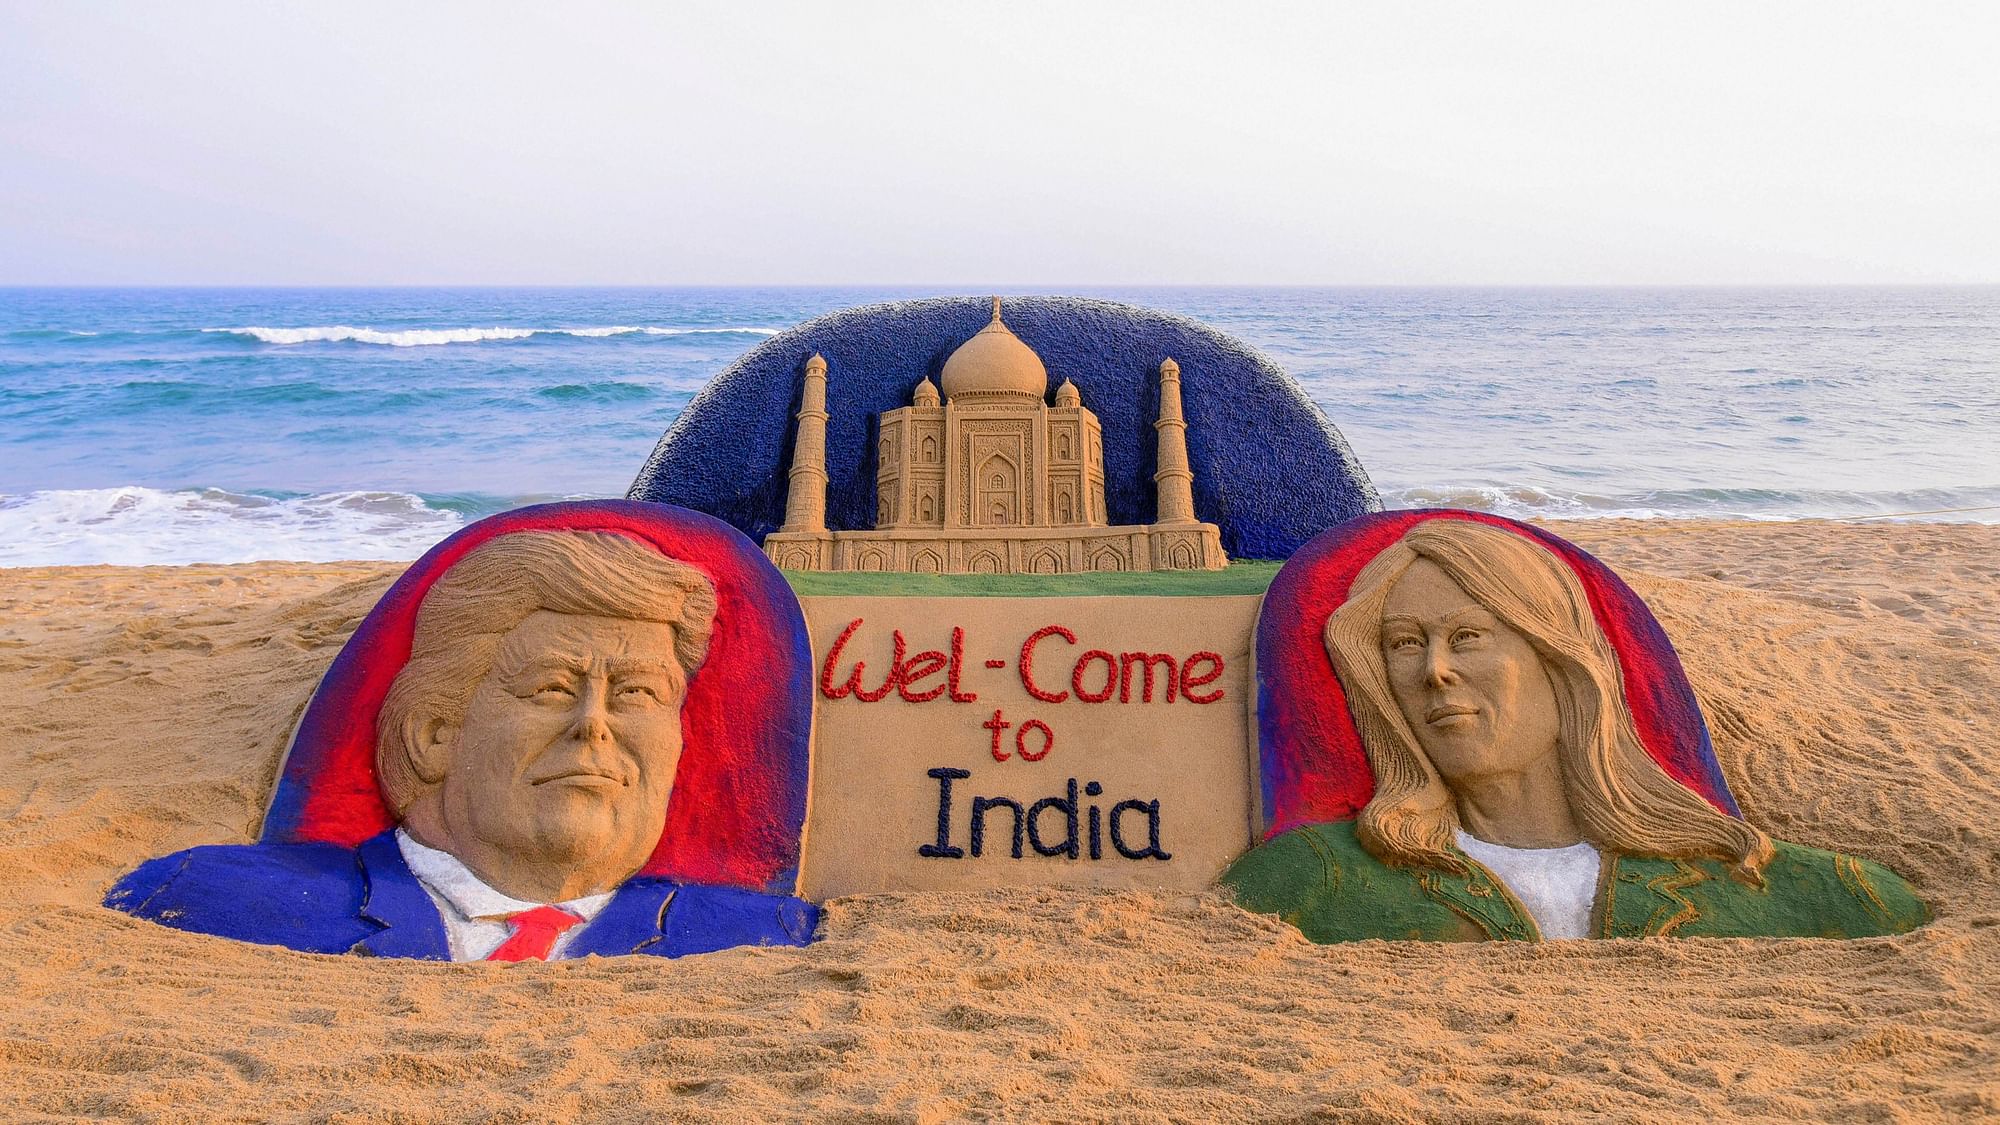 Donald Trump in India: Sand sculpture of US President Donald Trump with First Lady Melania Trump.